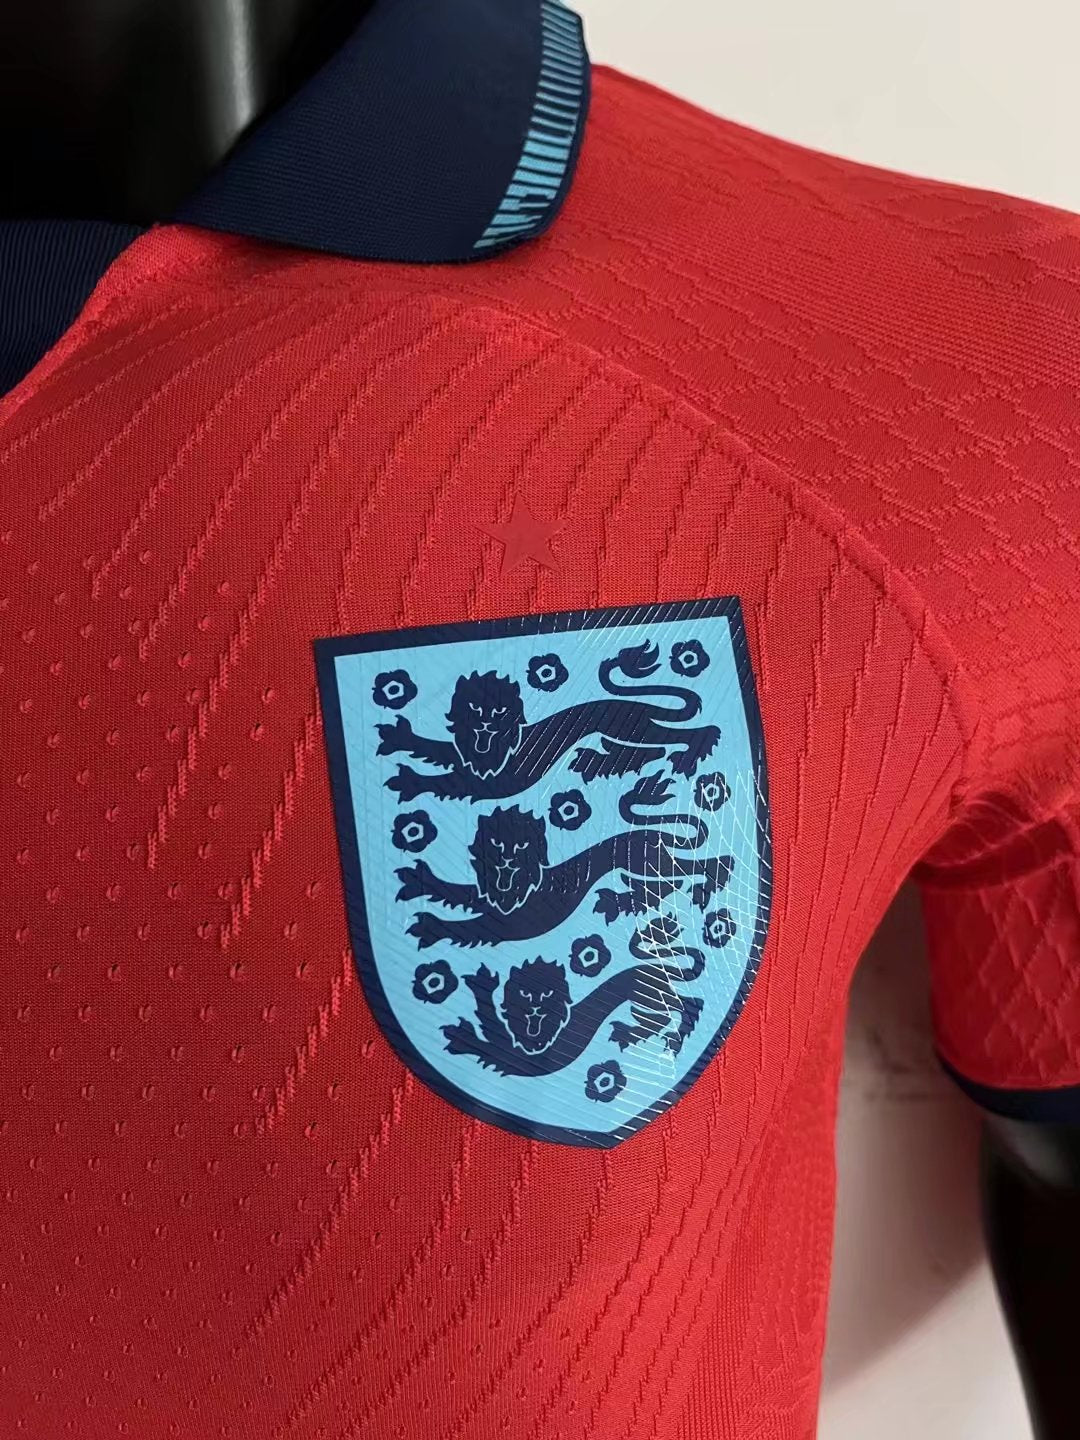 Bukayo Saka England National Team 2022/23 Away Authentic Nike On-Field Player Version Soccer Jersey - Red